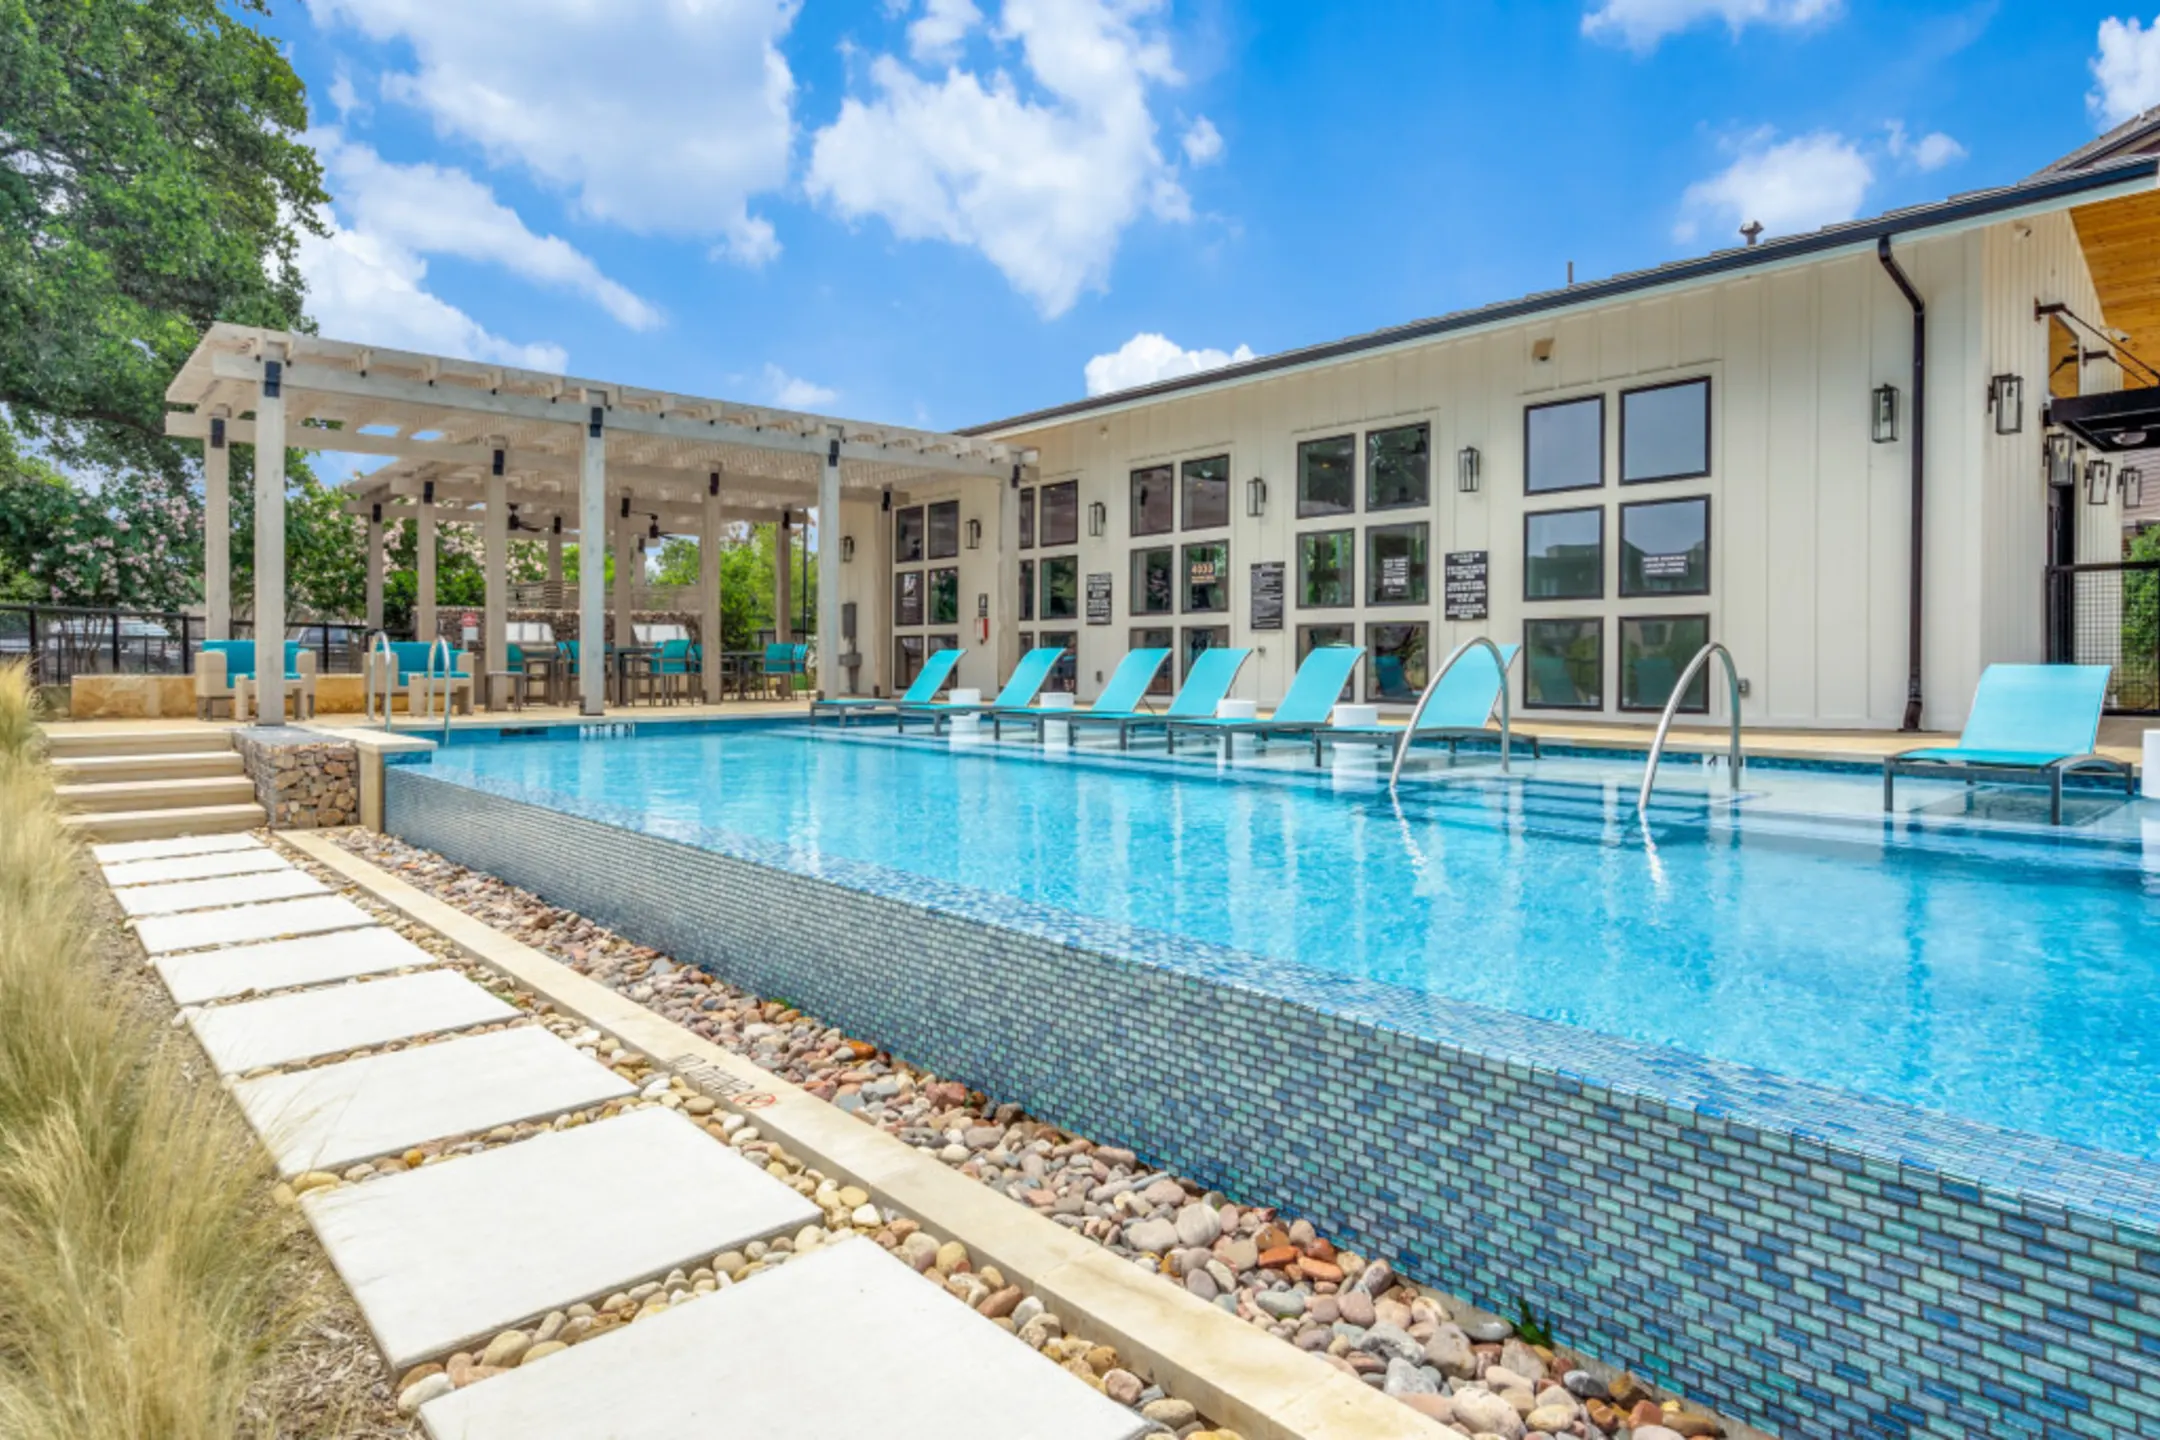 Pool - Midway Row House - Farmers Branch, TX